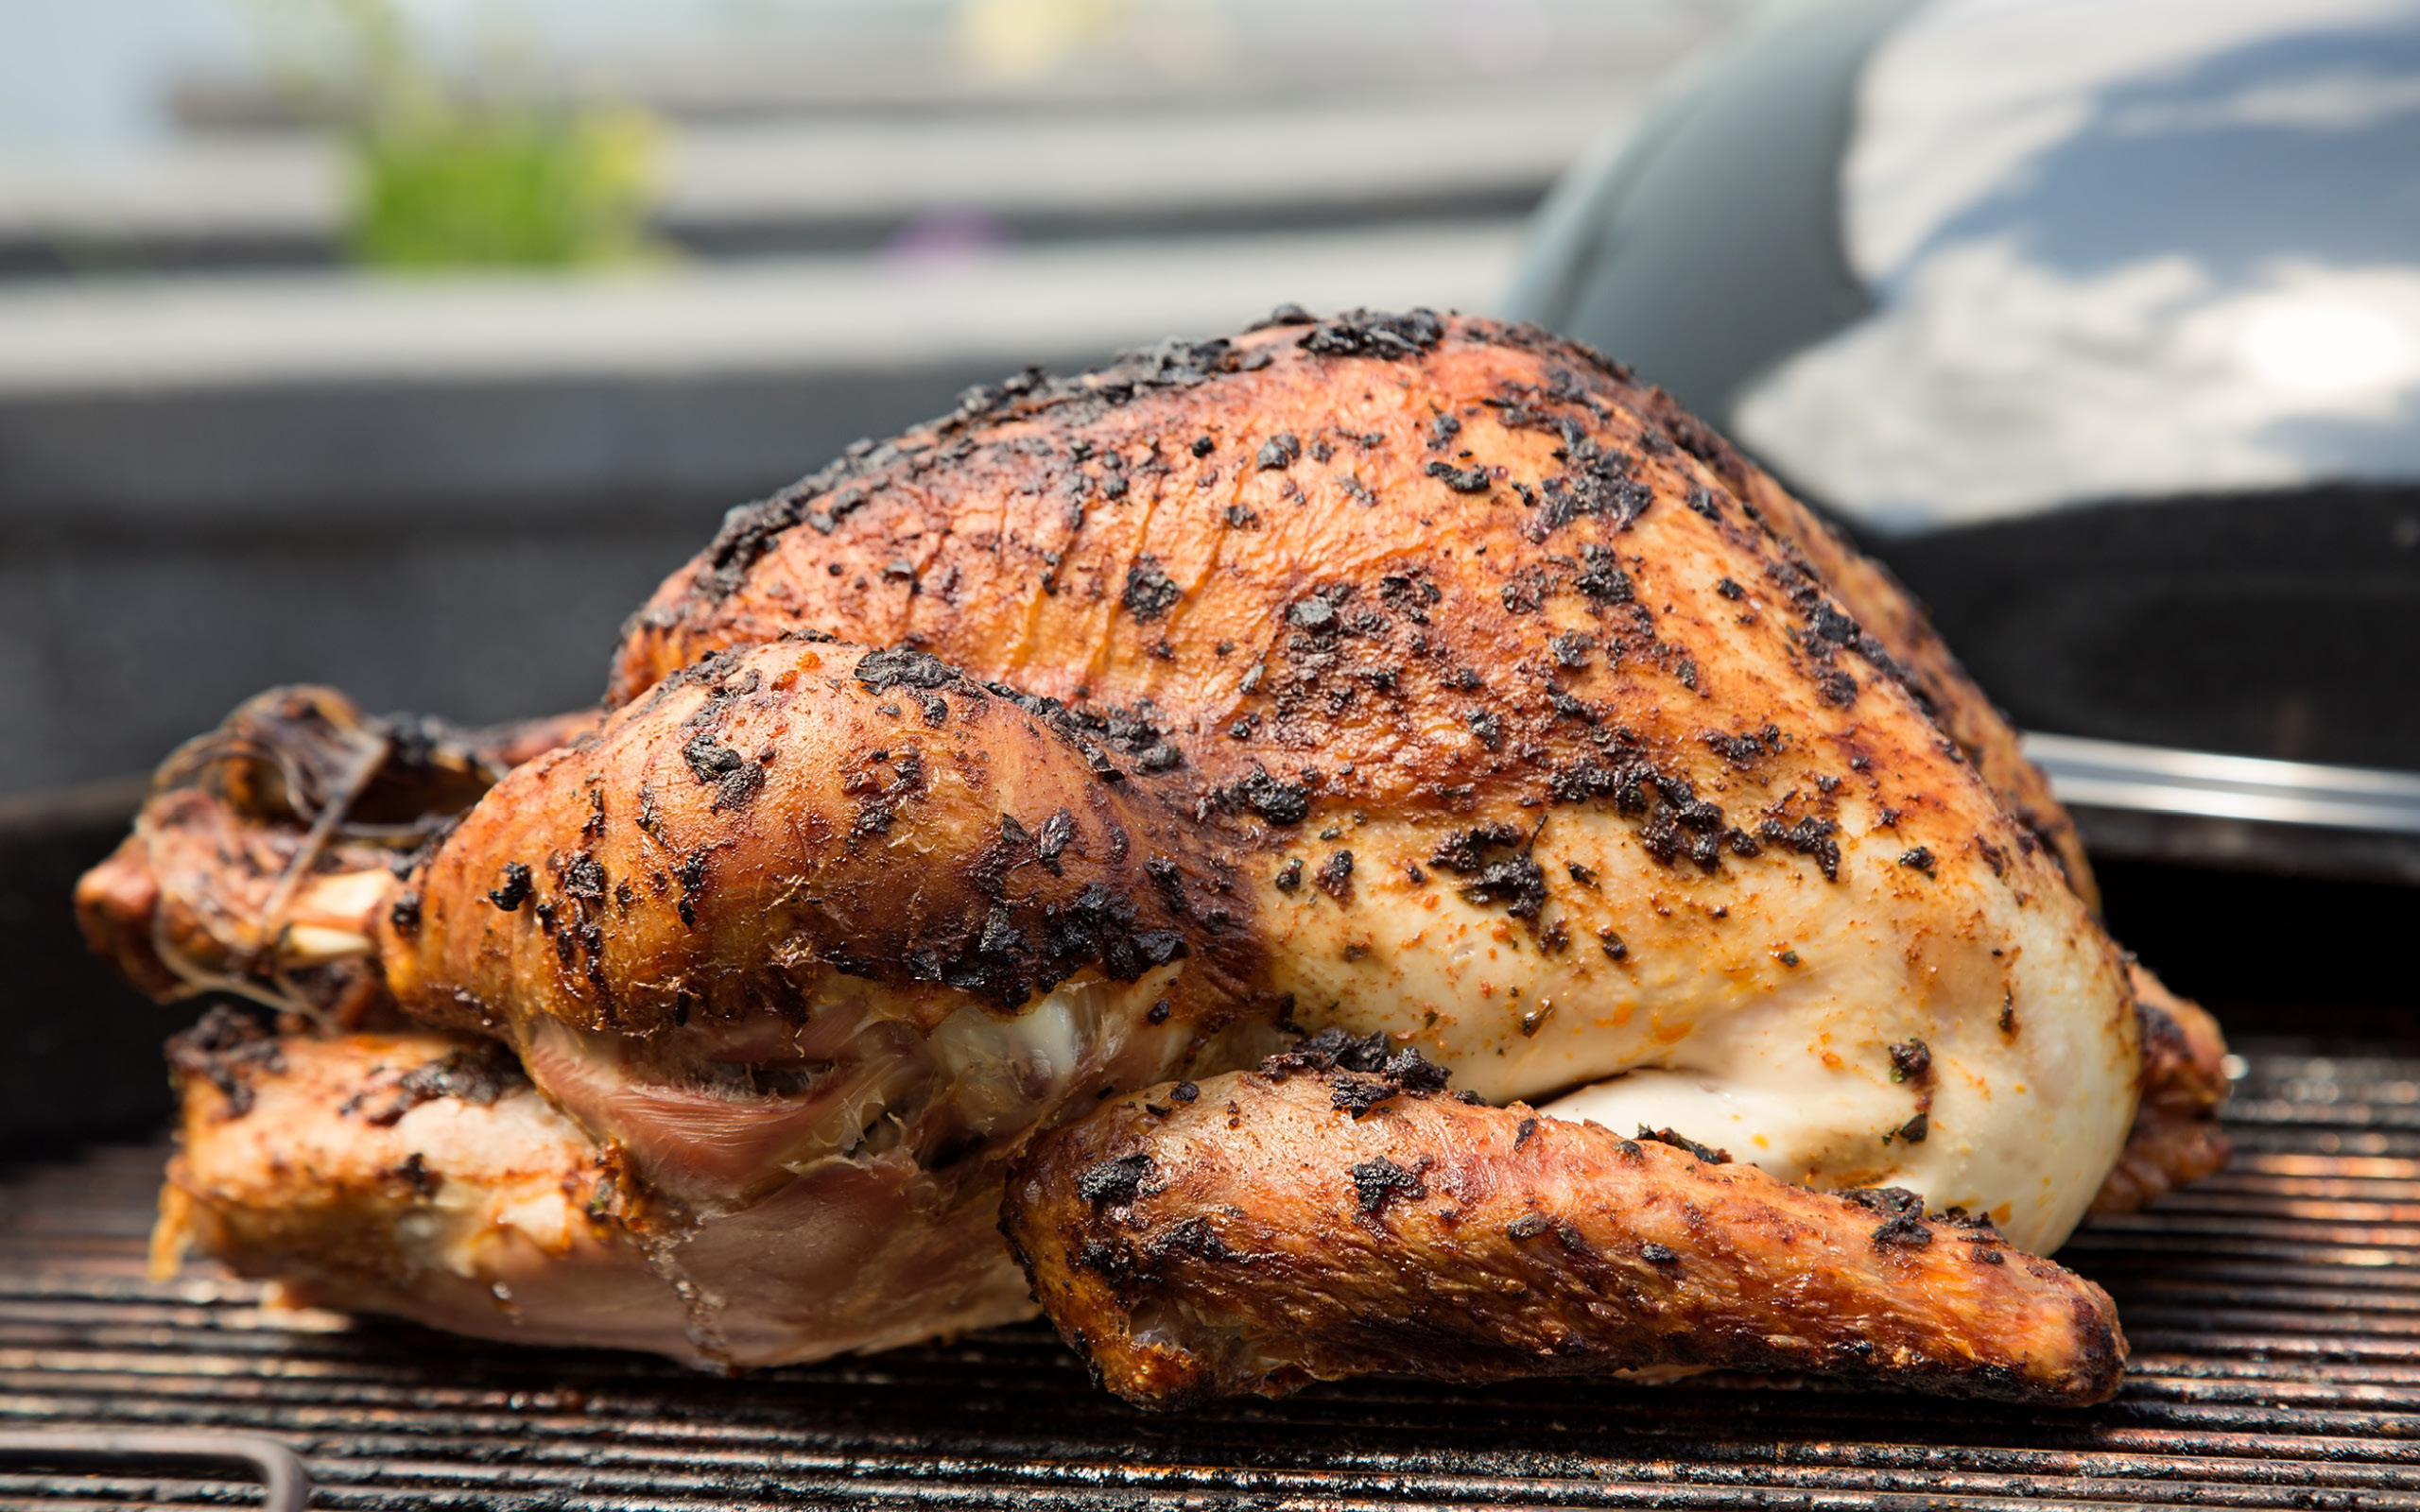 Barbecued Whole Turkey with Smoked Paprika and Parsley - Granny's